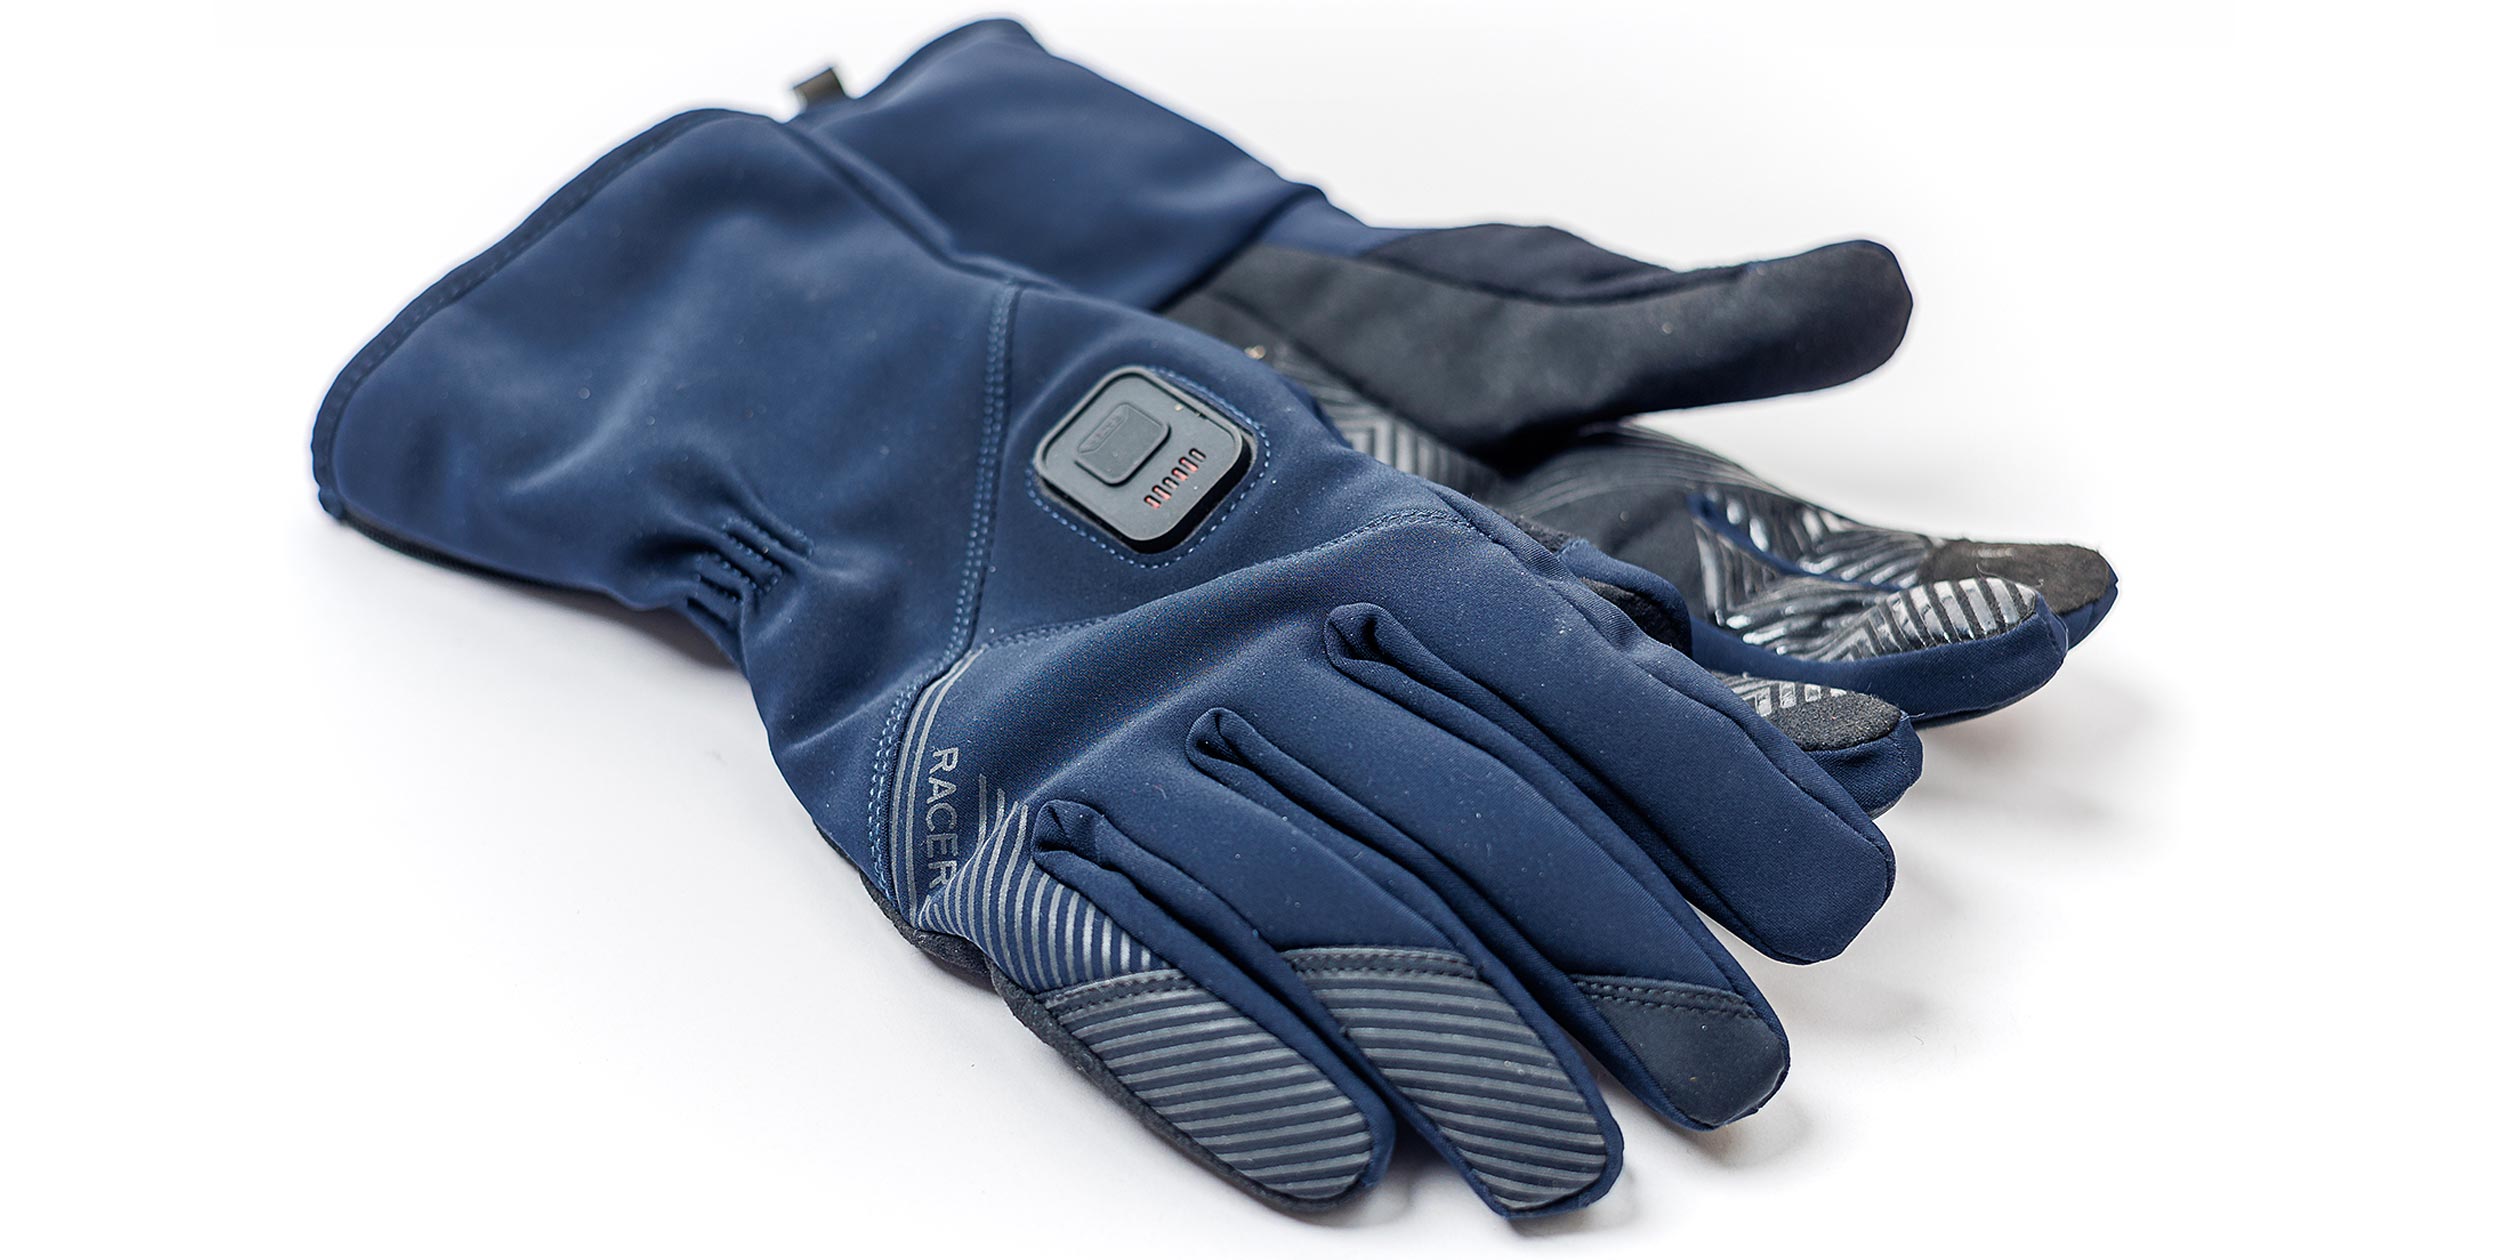 Racer E-Glove 4 review | Cross Country Magazine – In the Core since 1988